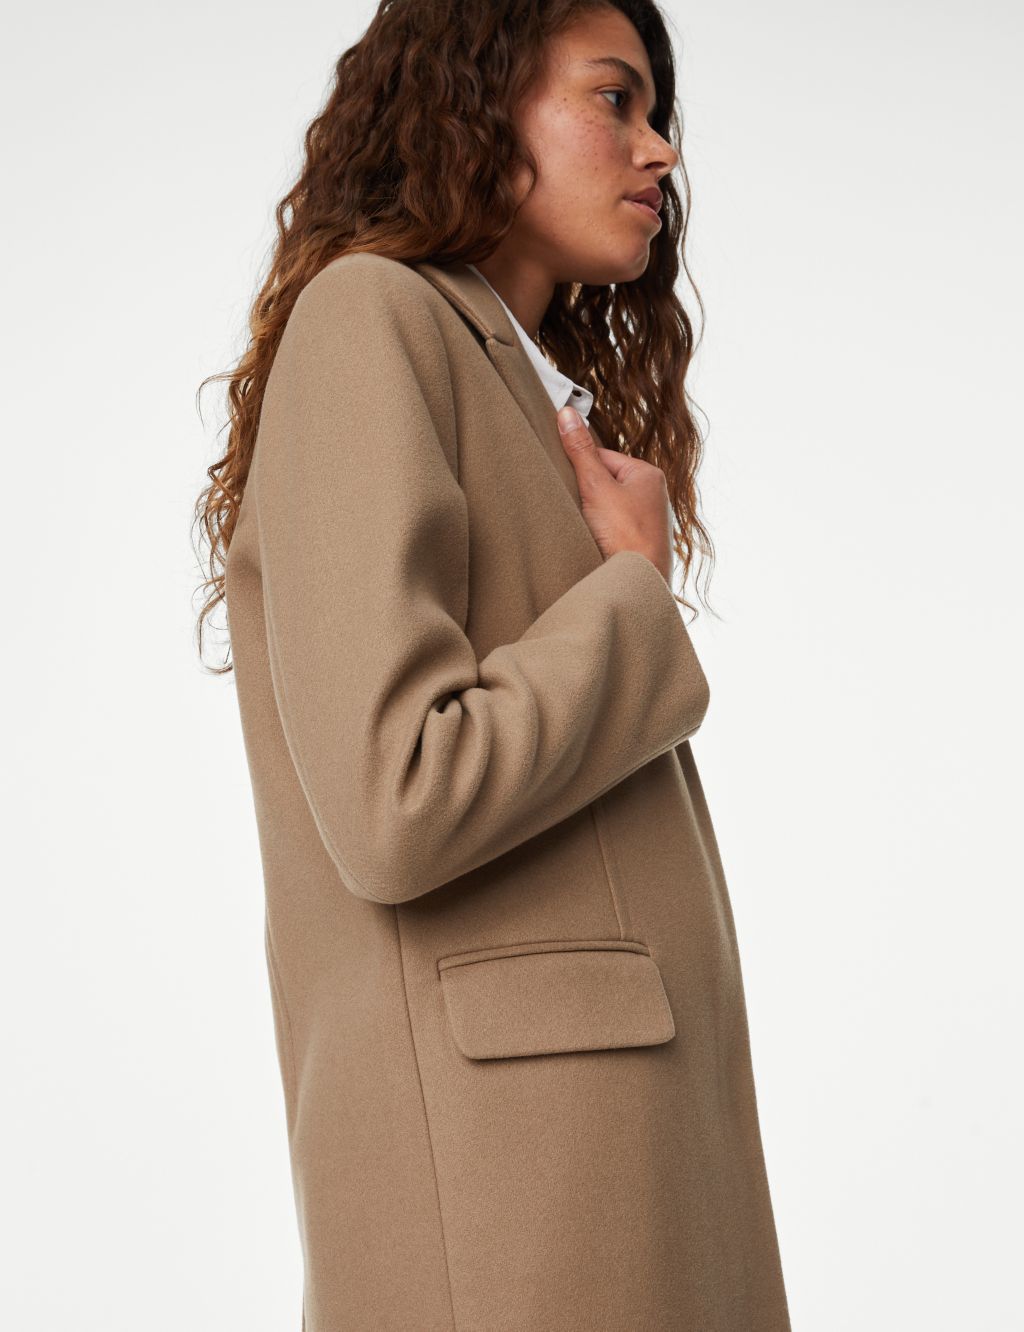 Tailored Single Breasted Coat image 4